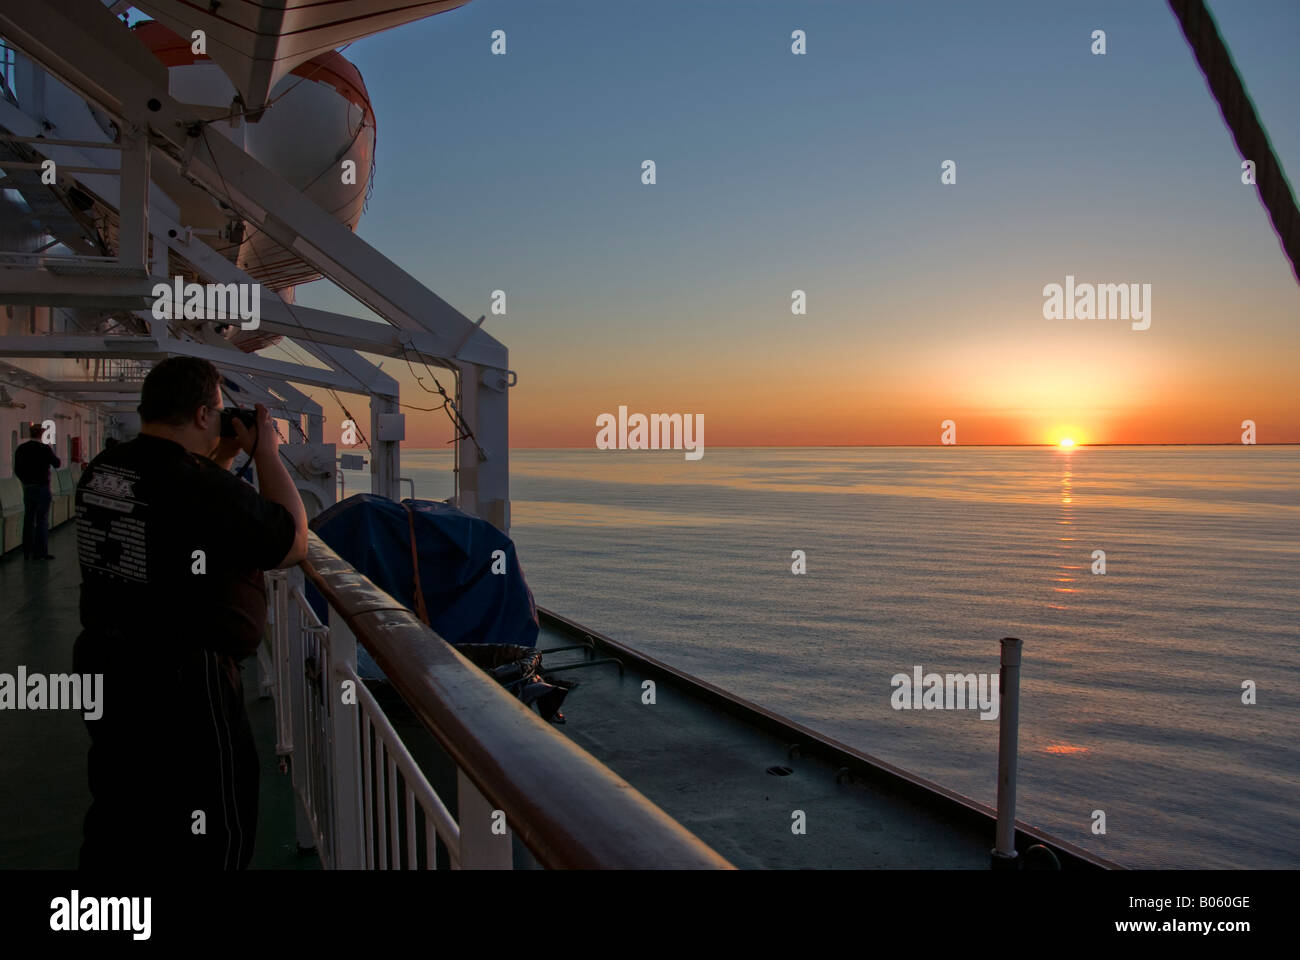 People photographing the sunset on a cruise ship Stock Photo